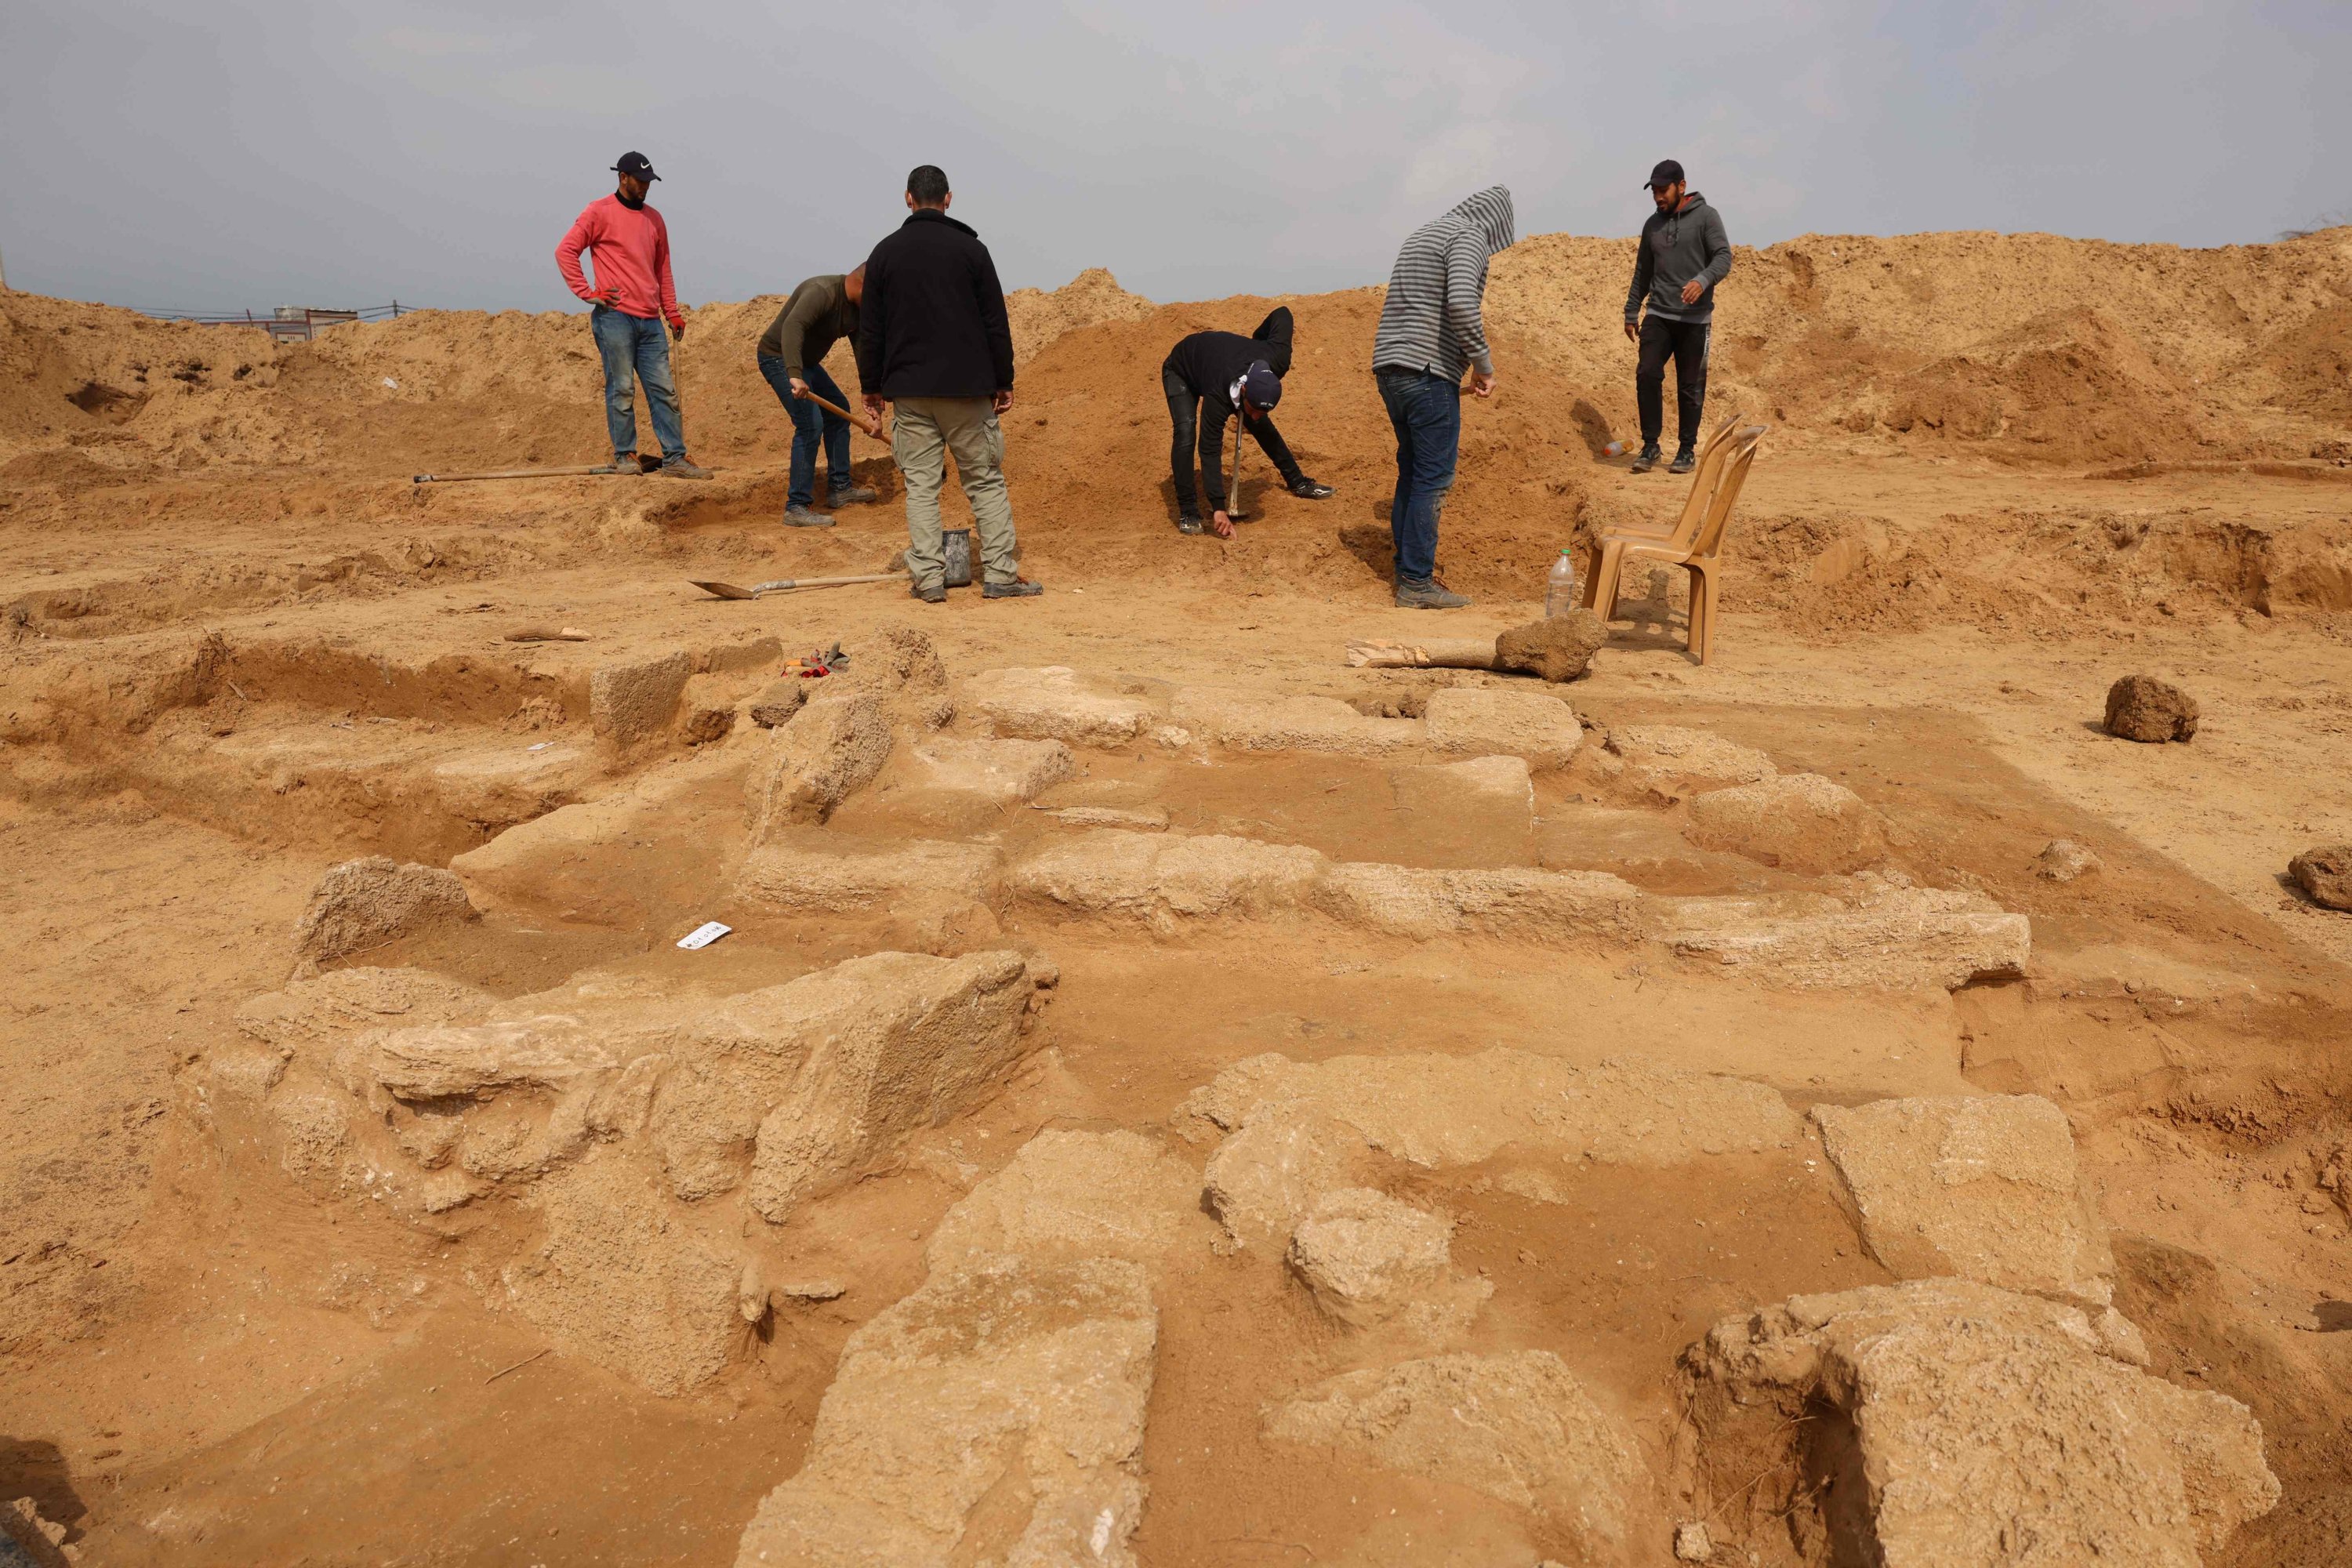 Palestinian workers excavate a newly discovered Roman cemetery containing ornately decorated graves, in Beit Lahia in the northern Gaza Strip, Feb. 20, 2022. (AFP)